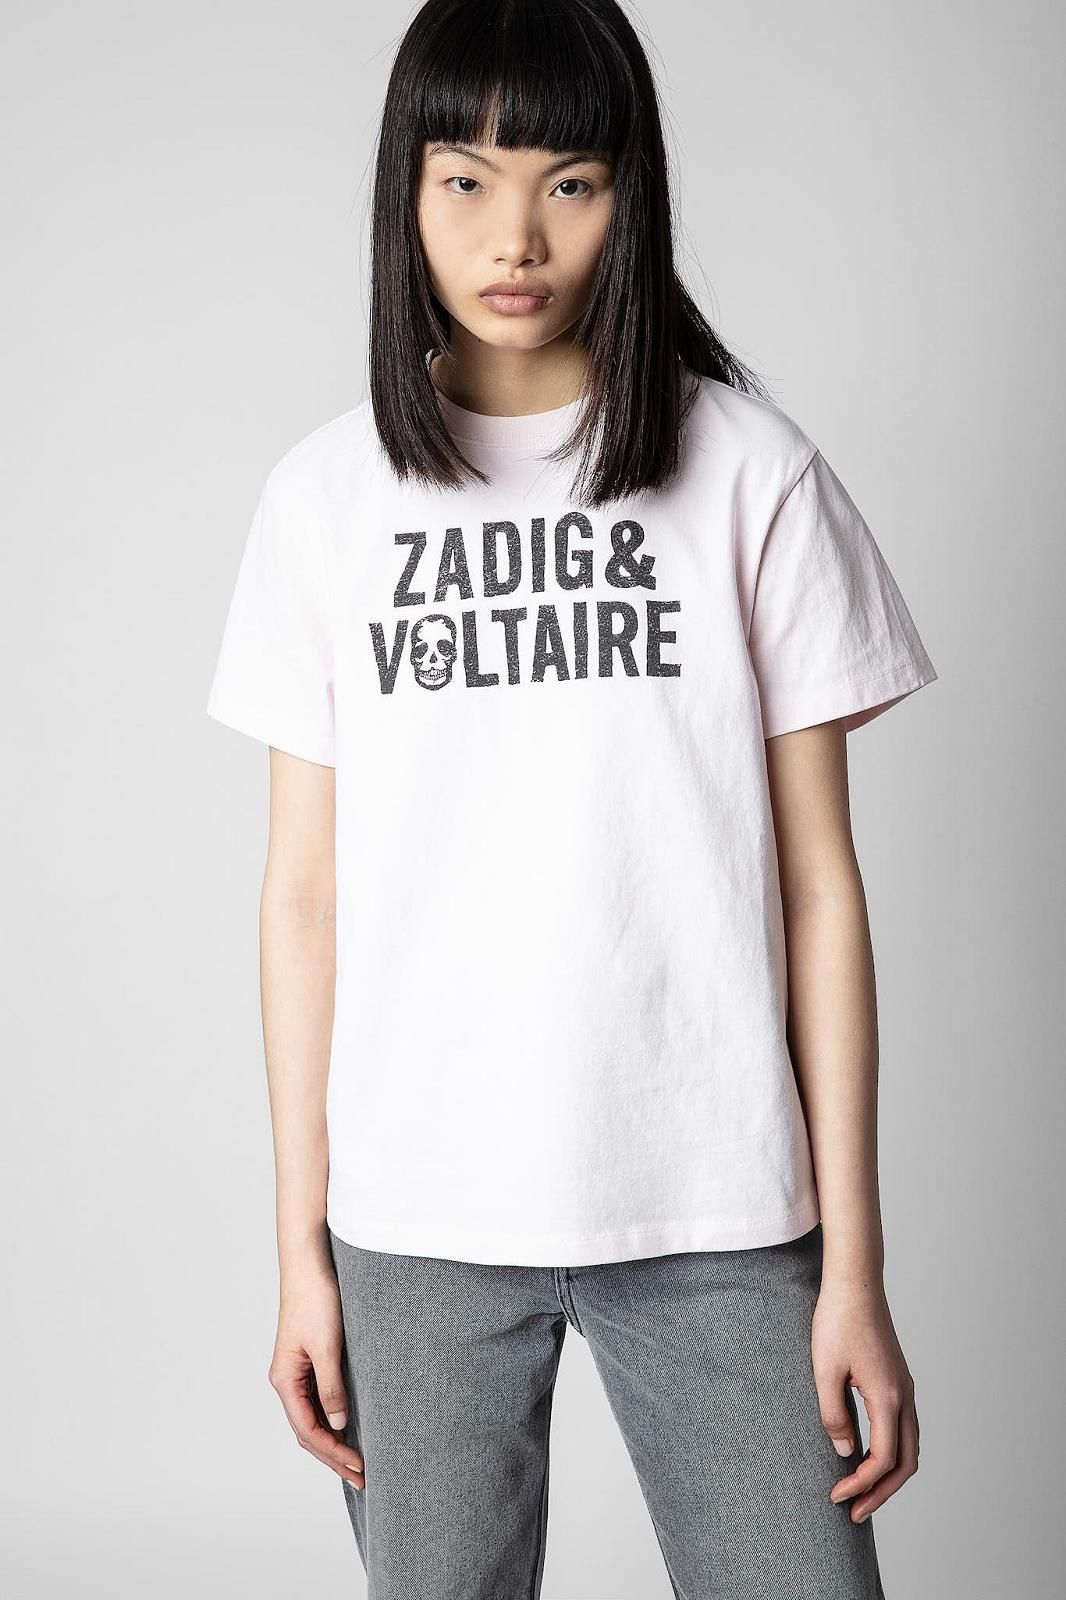 Zadig & Voltaire Vêtements tee-Shirt Rose femmes (écriture ZADIG + TDM - OMMA TS rose) - Marine | Much more than shoes